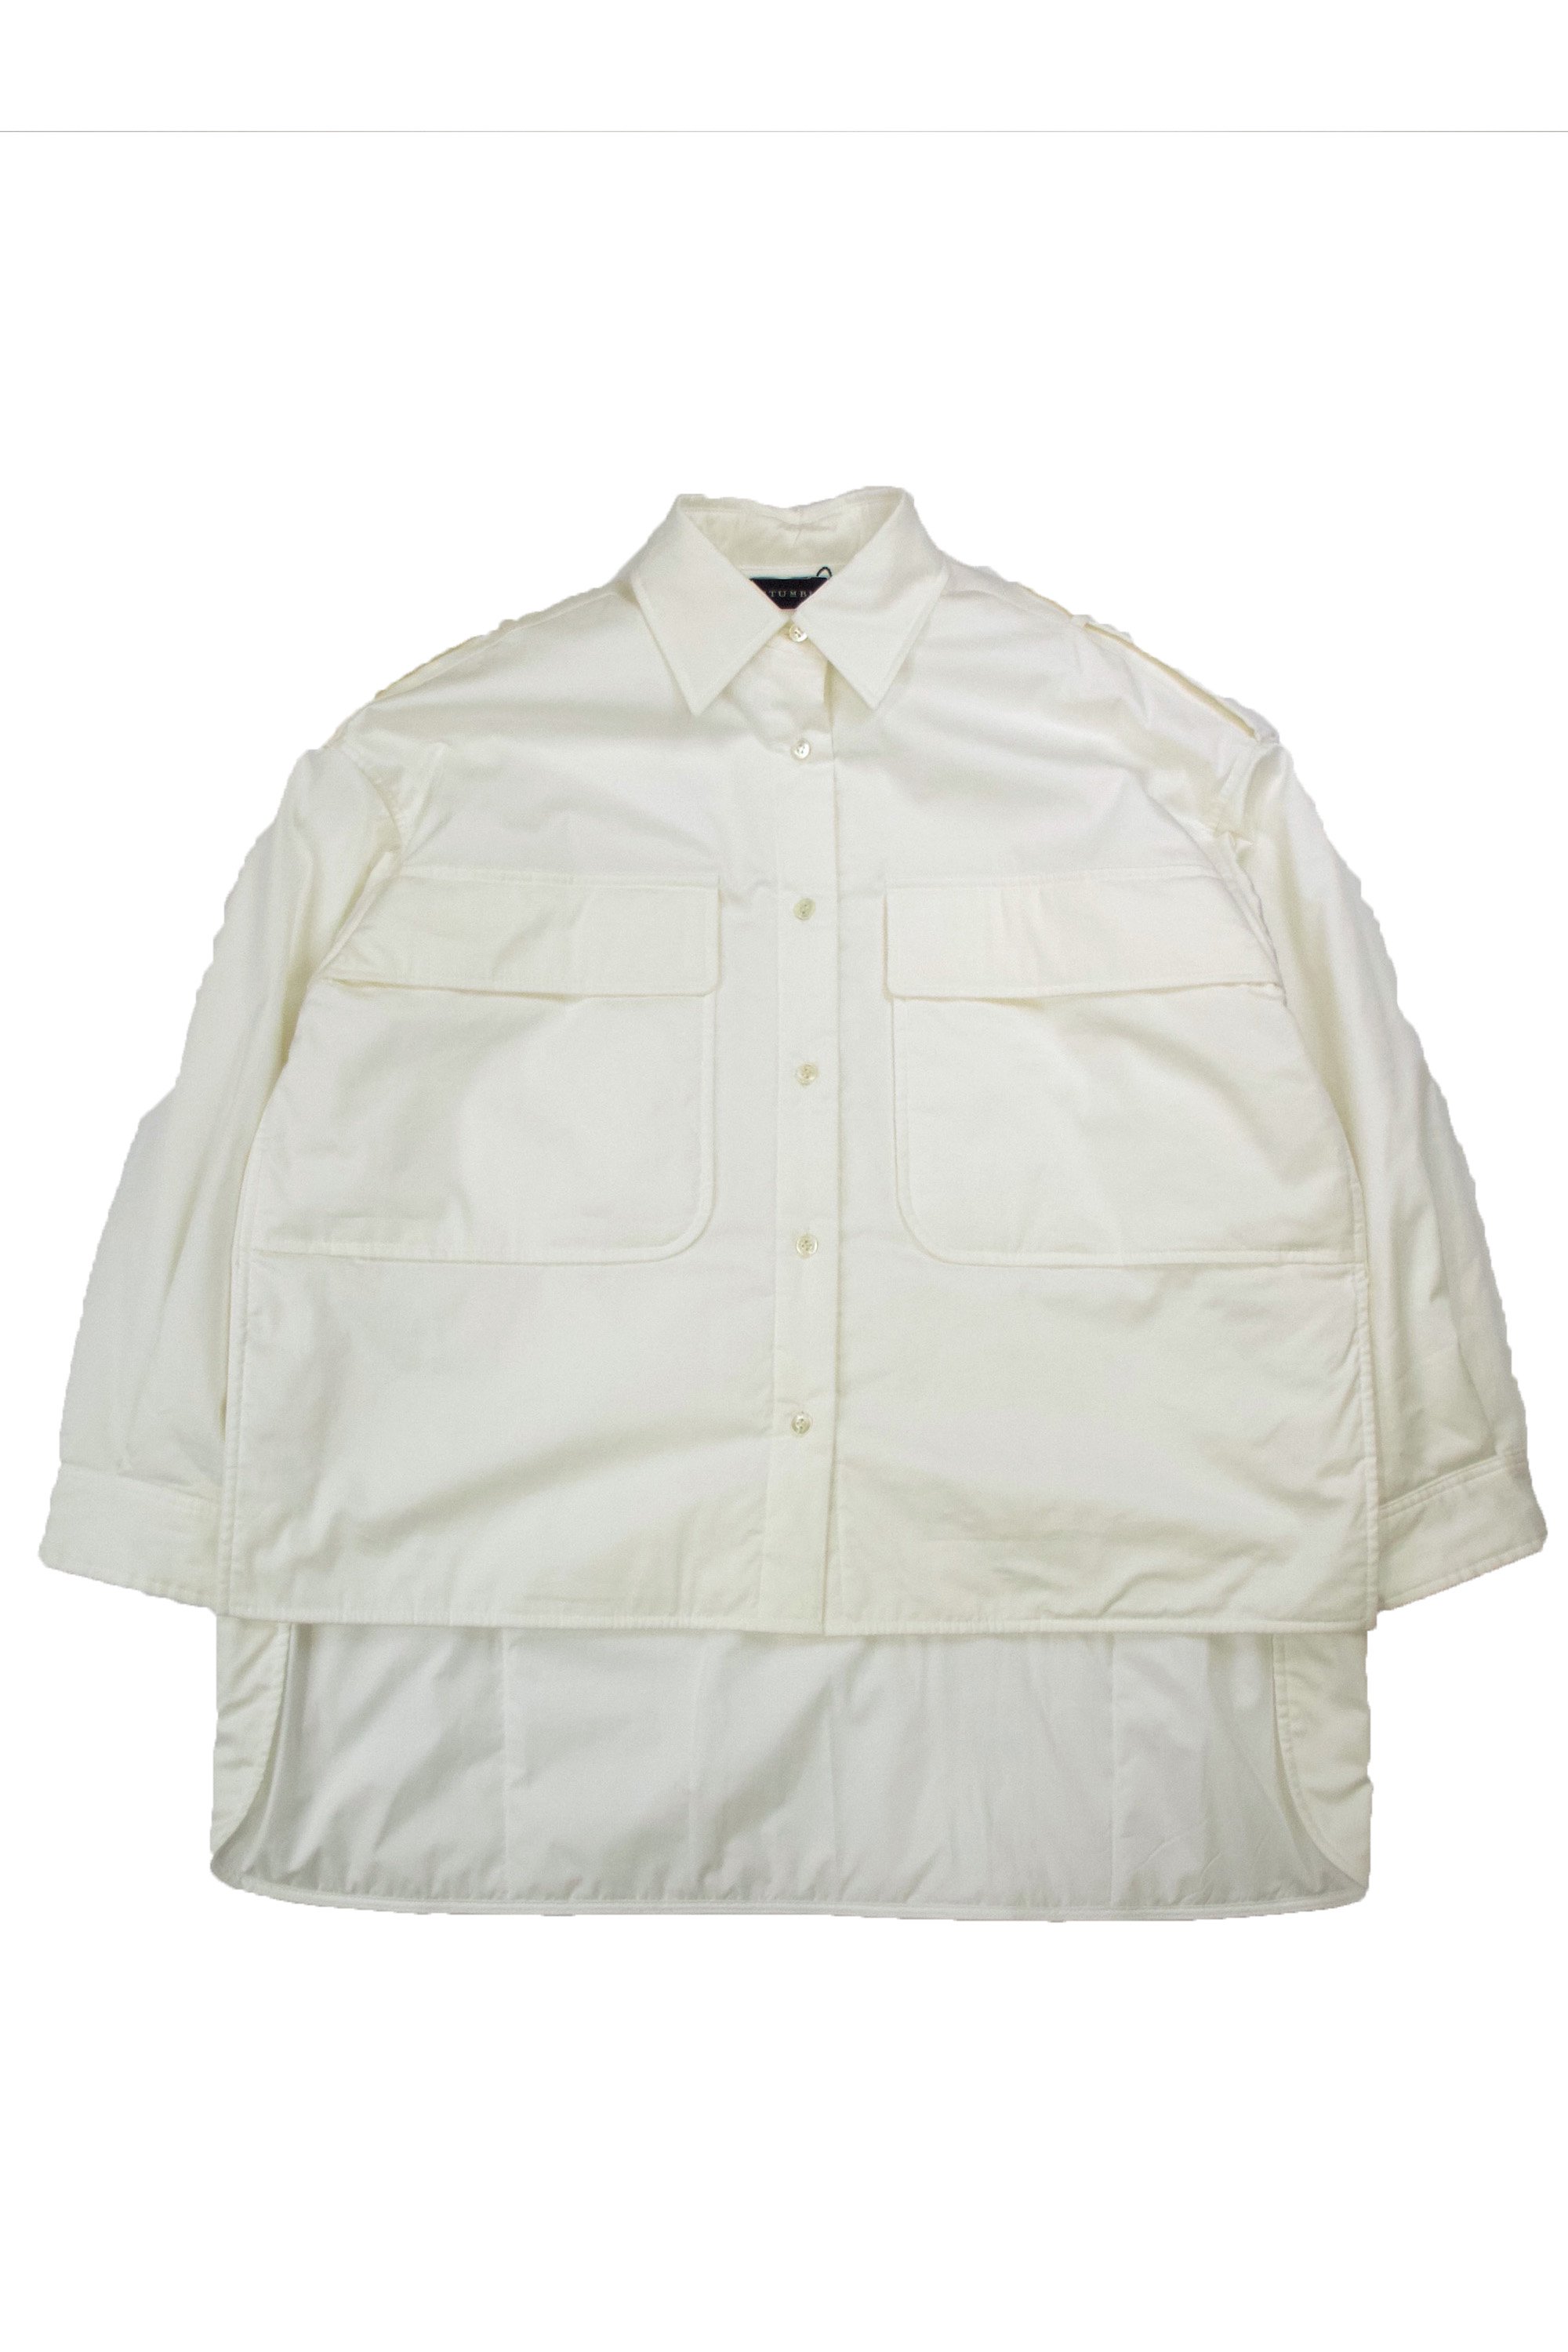 <img class='new_mark_img1' src='https://img.shop-pro.jp/img/new/icons22.gif' style='border:none;display:inline;margin:0px;padding:0px;width:auto;' />【30%OFF】 STUMBLY Shirt jacket